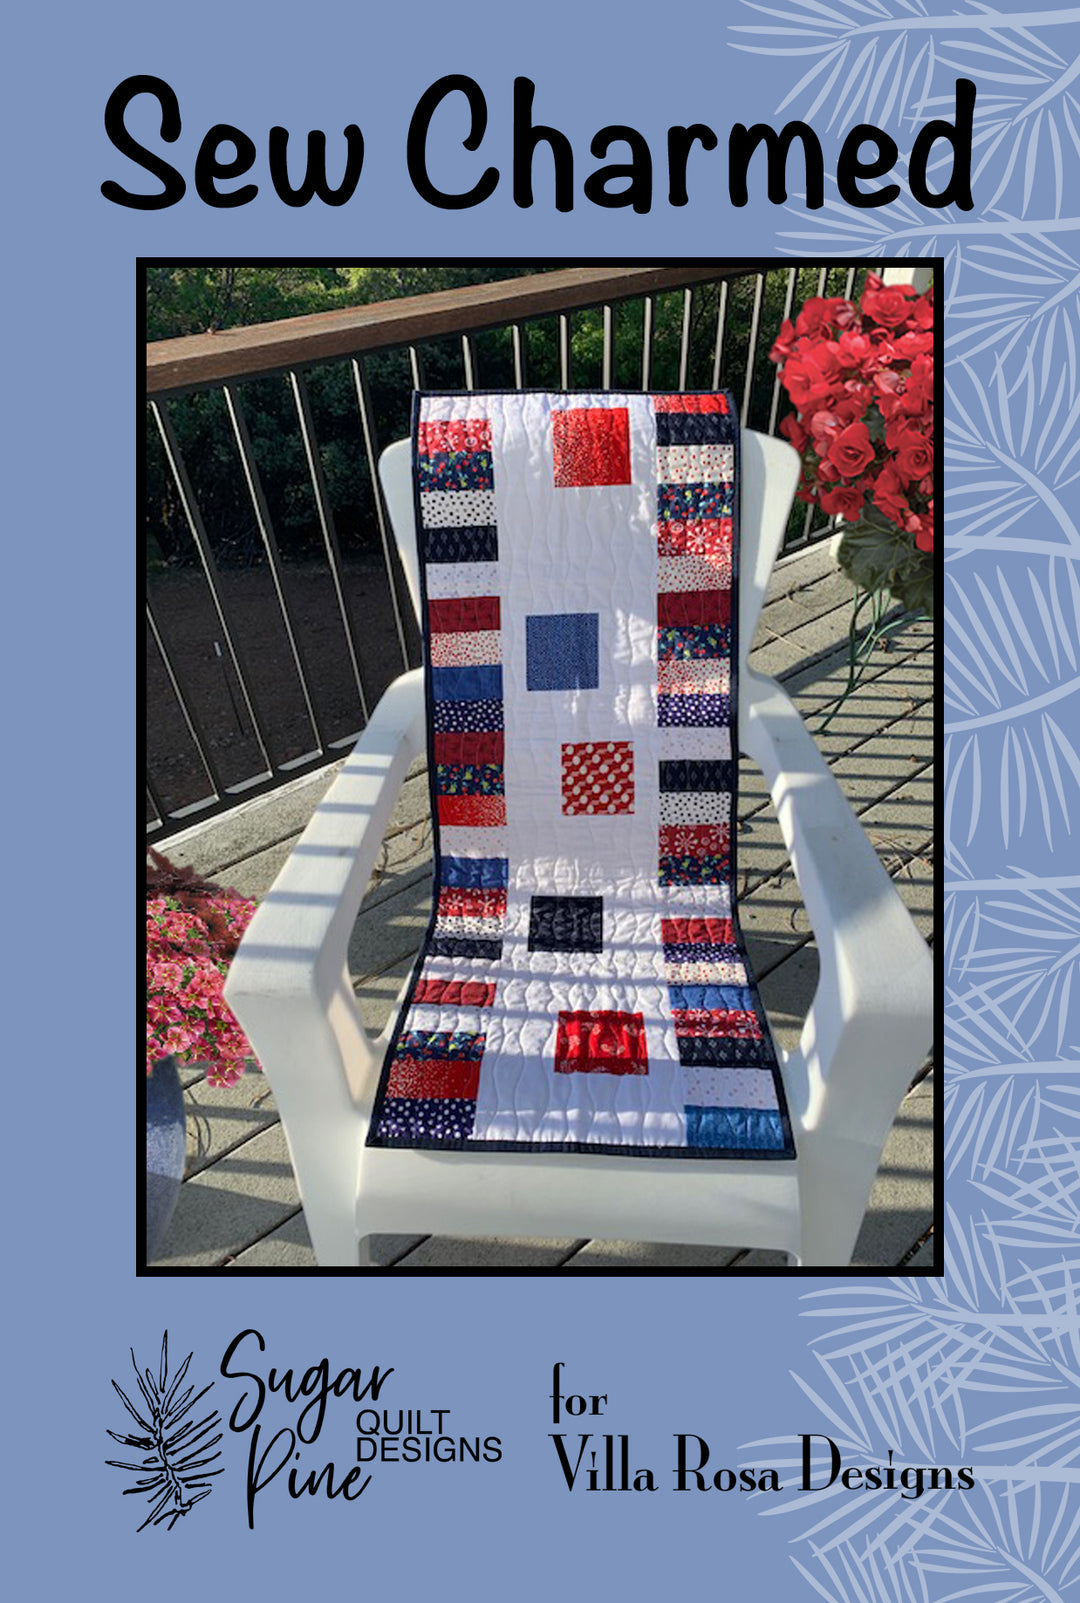 Sew Charmed Table Runner Quilt Pattern by Villa Rosa Designs